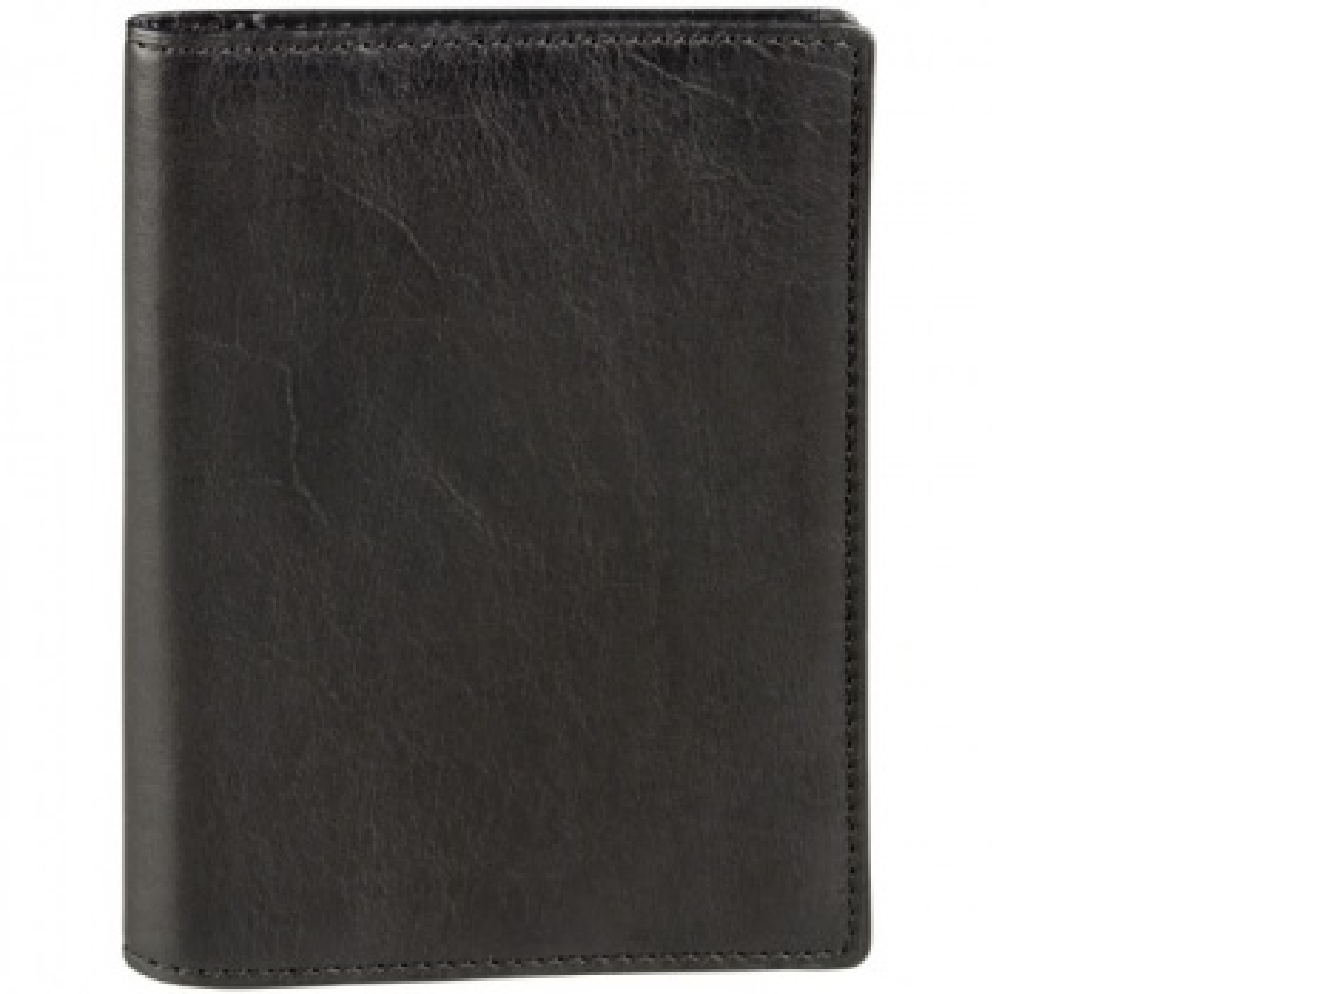 Passport Wallet

This product will protect yo...